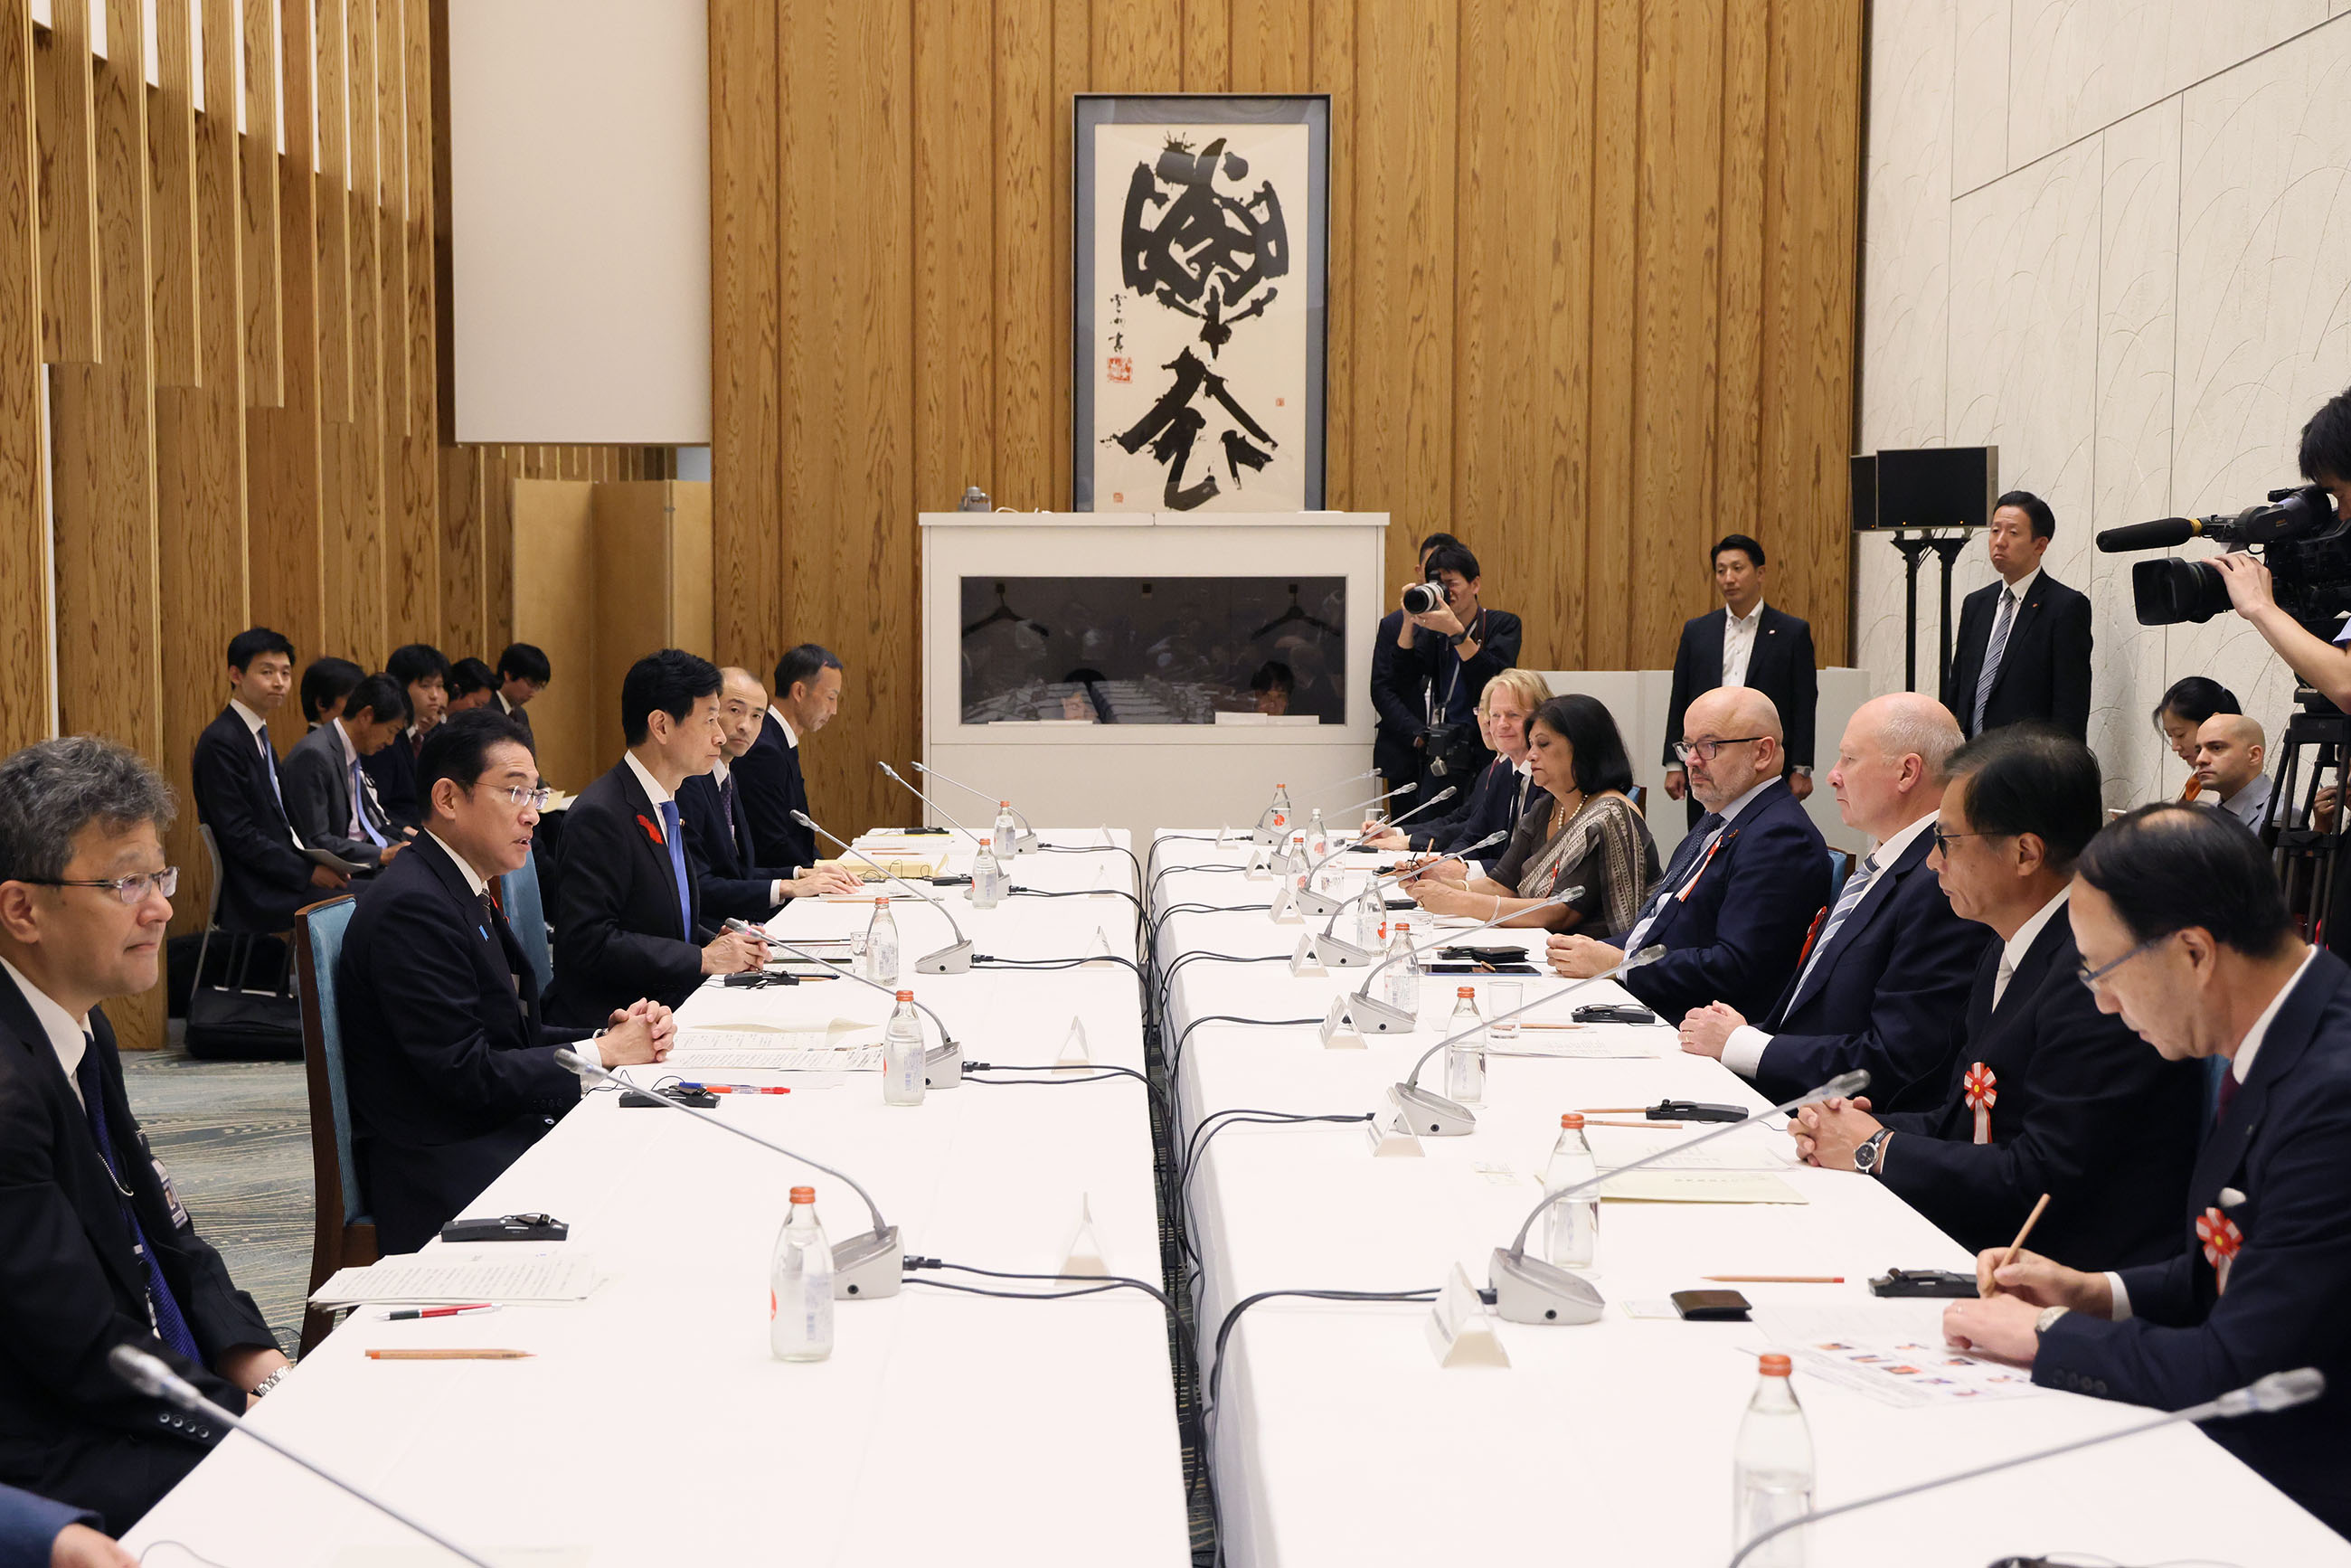 Prime Minister Kishida participating in the roundtable (3)